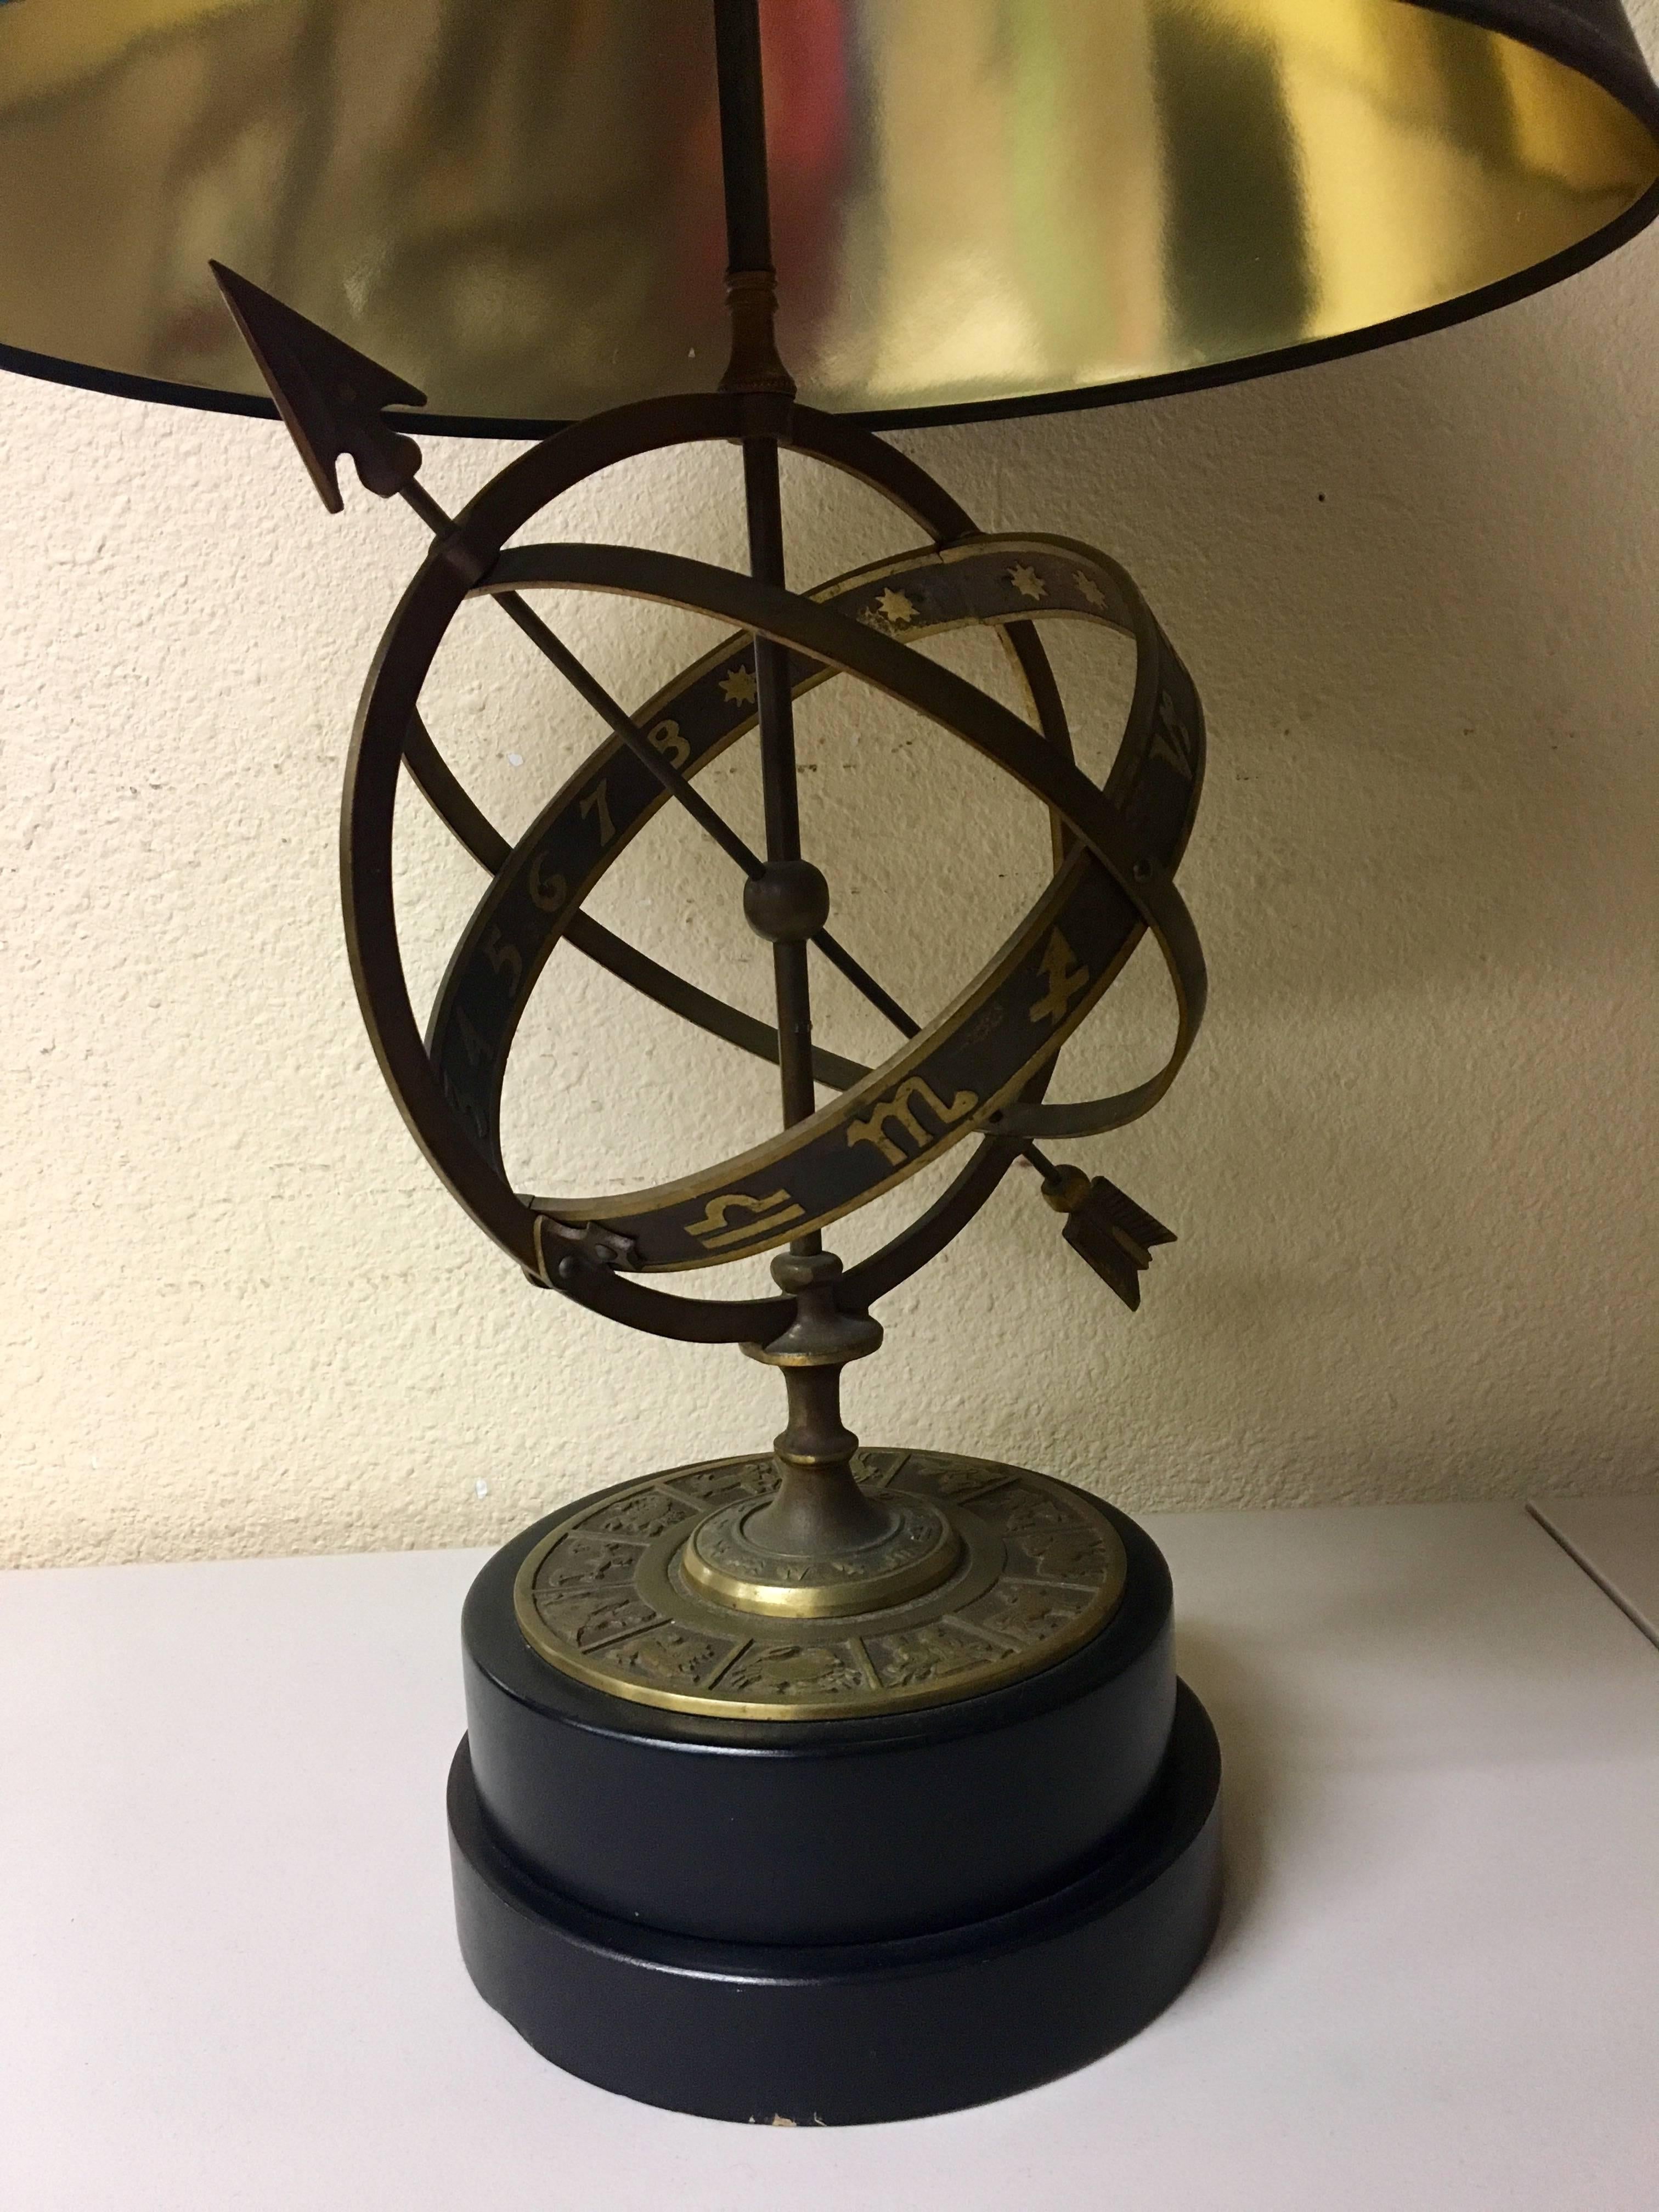 Absolutely stunning pair of Armillary Sphere table lamps by the famed Frederick Cooper of Chicago. These beautiful lamps are constructed of copper-plated iron with a solid, turned wooden base. All in all it’s a Classic. I can see this lamp in a